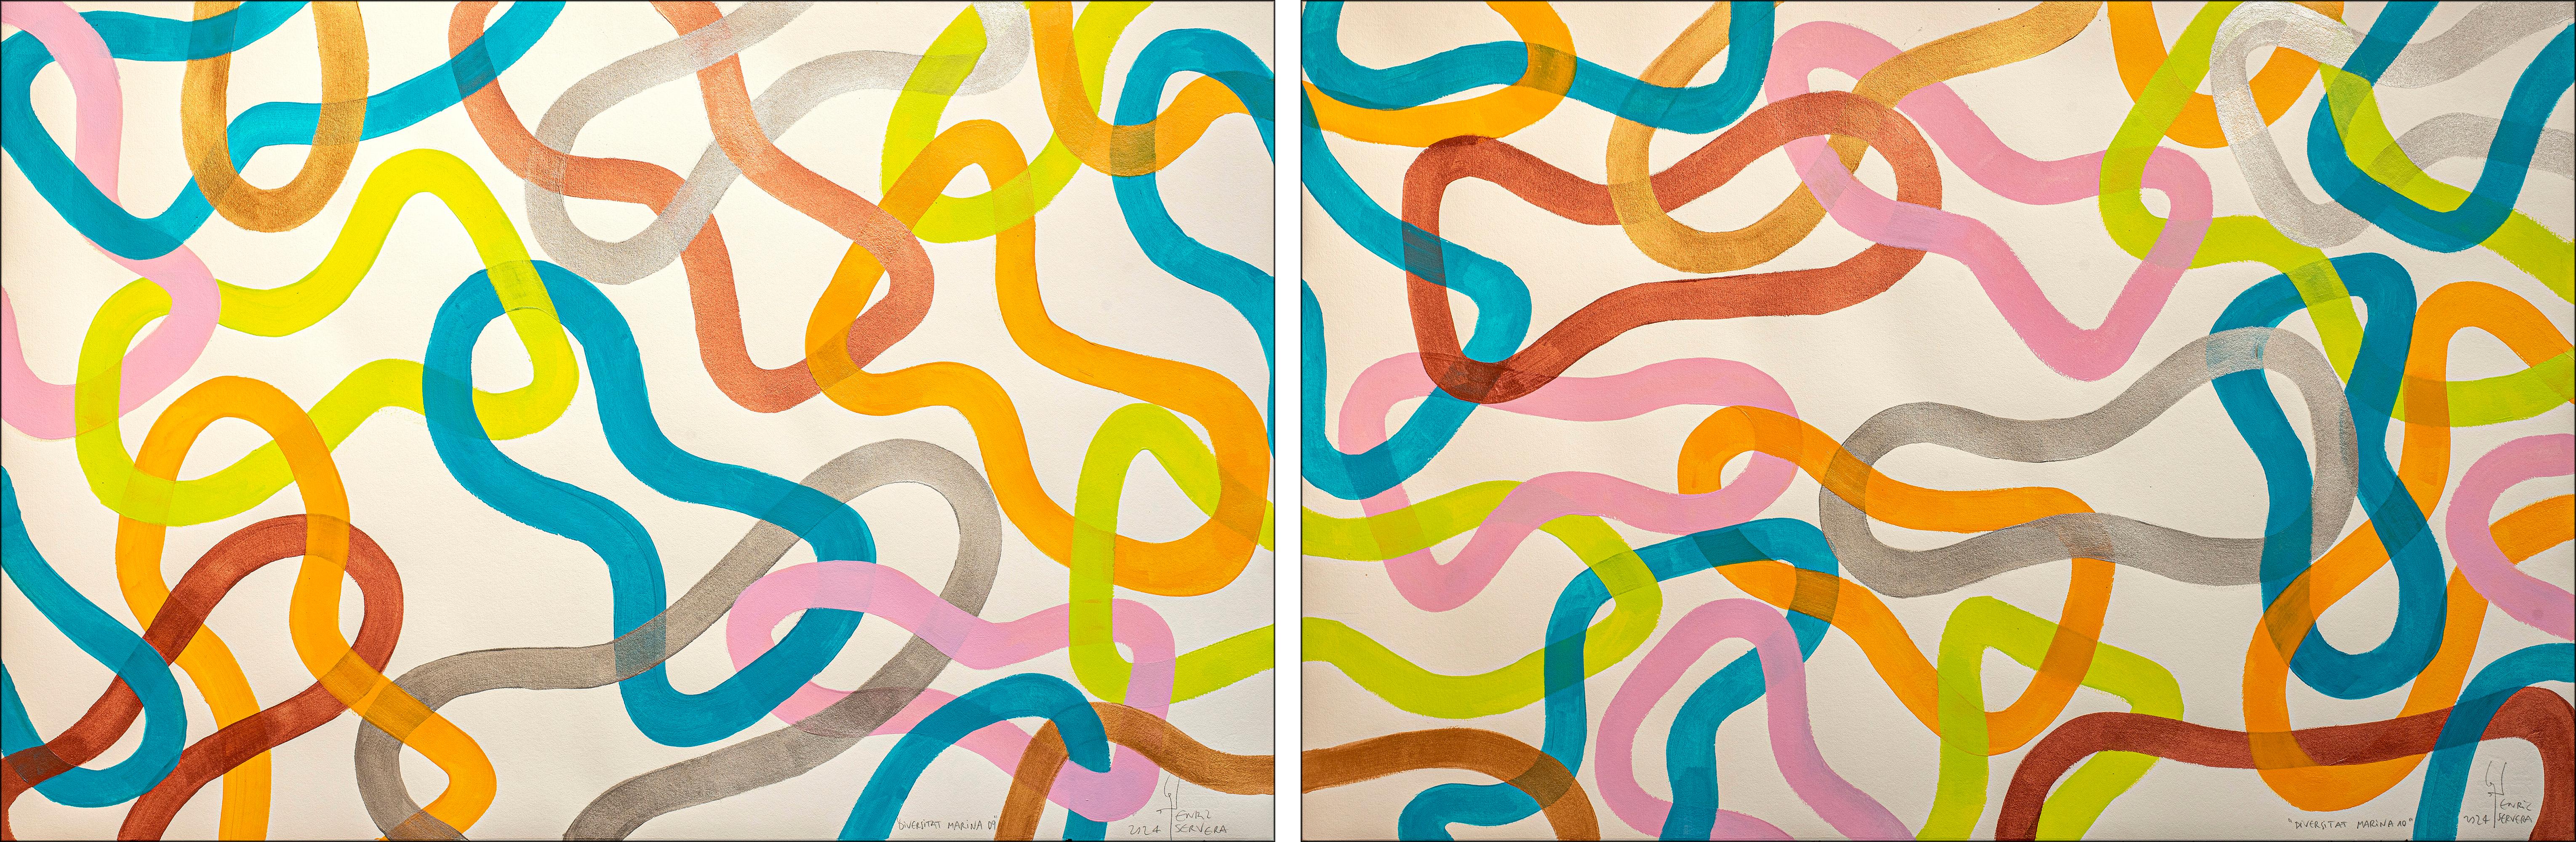 Enric Servera Abstract Painting - Marine Diversity Diptych, Abstract Colourful Fish Patterns, Vivid Tones Gestures